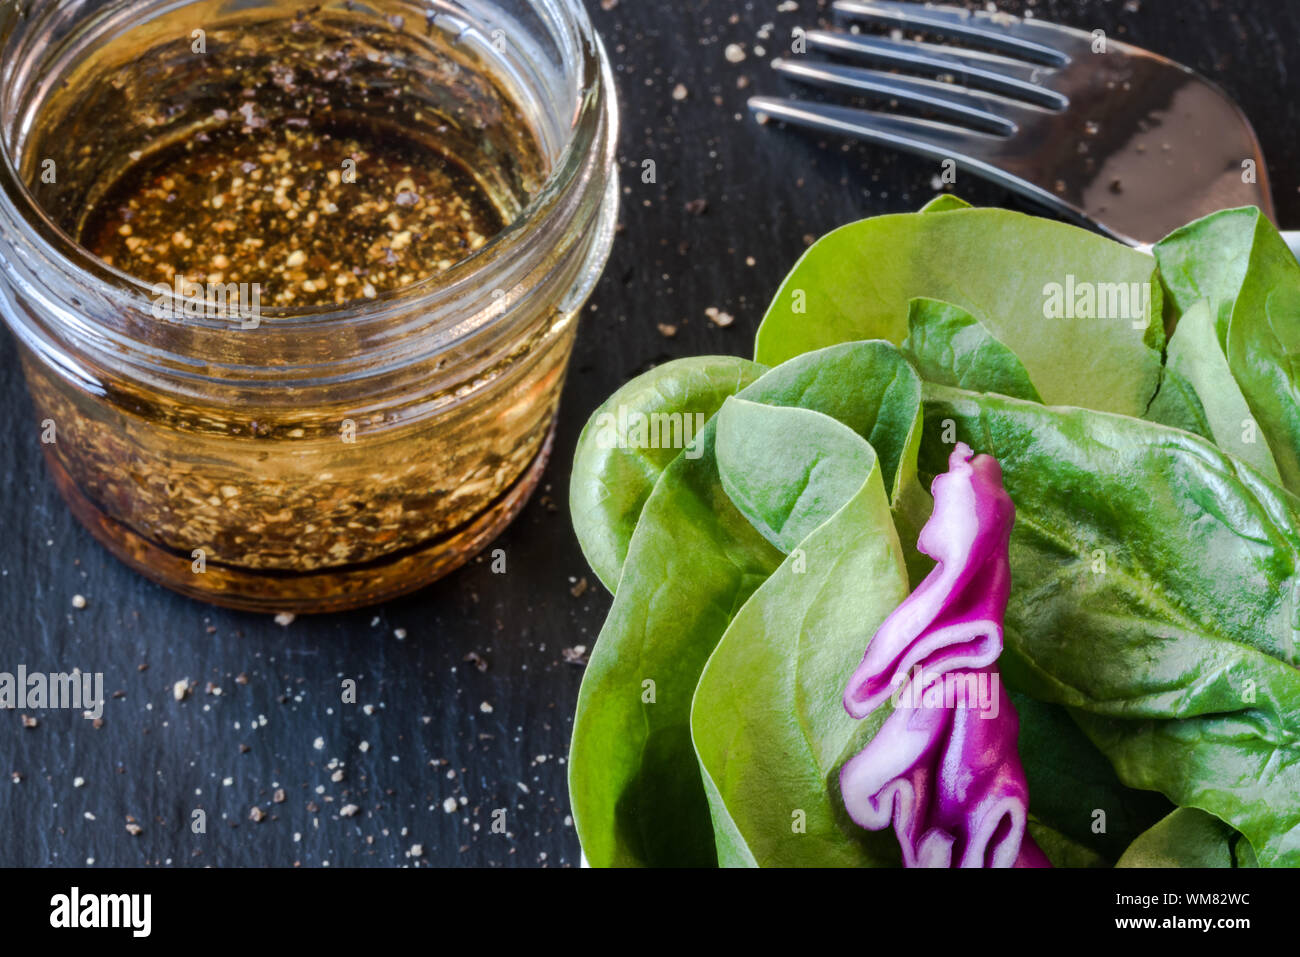 High Angle View Of Vinegar With Leaf Vegetable On Table Stock Photo